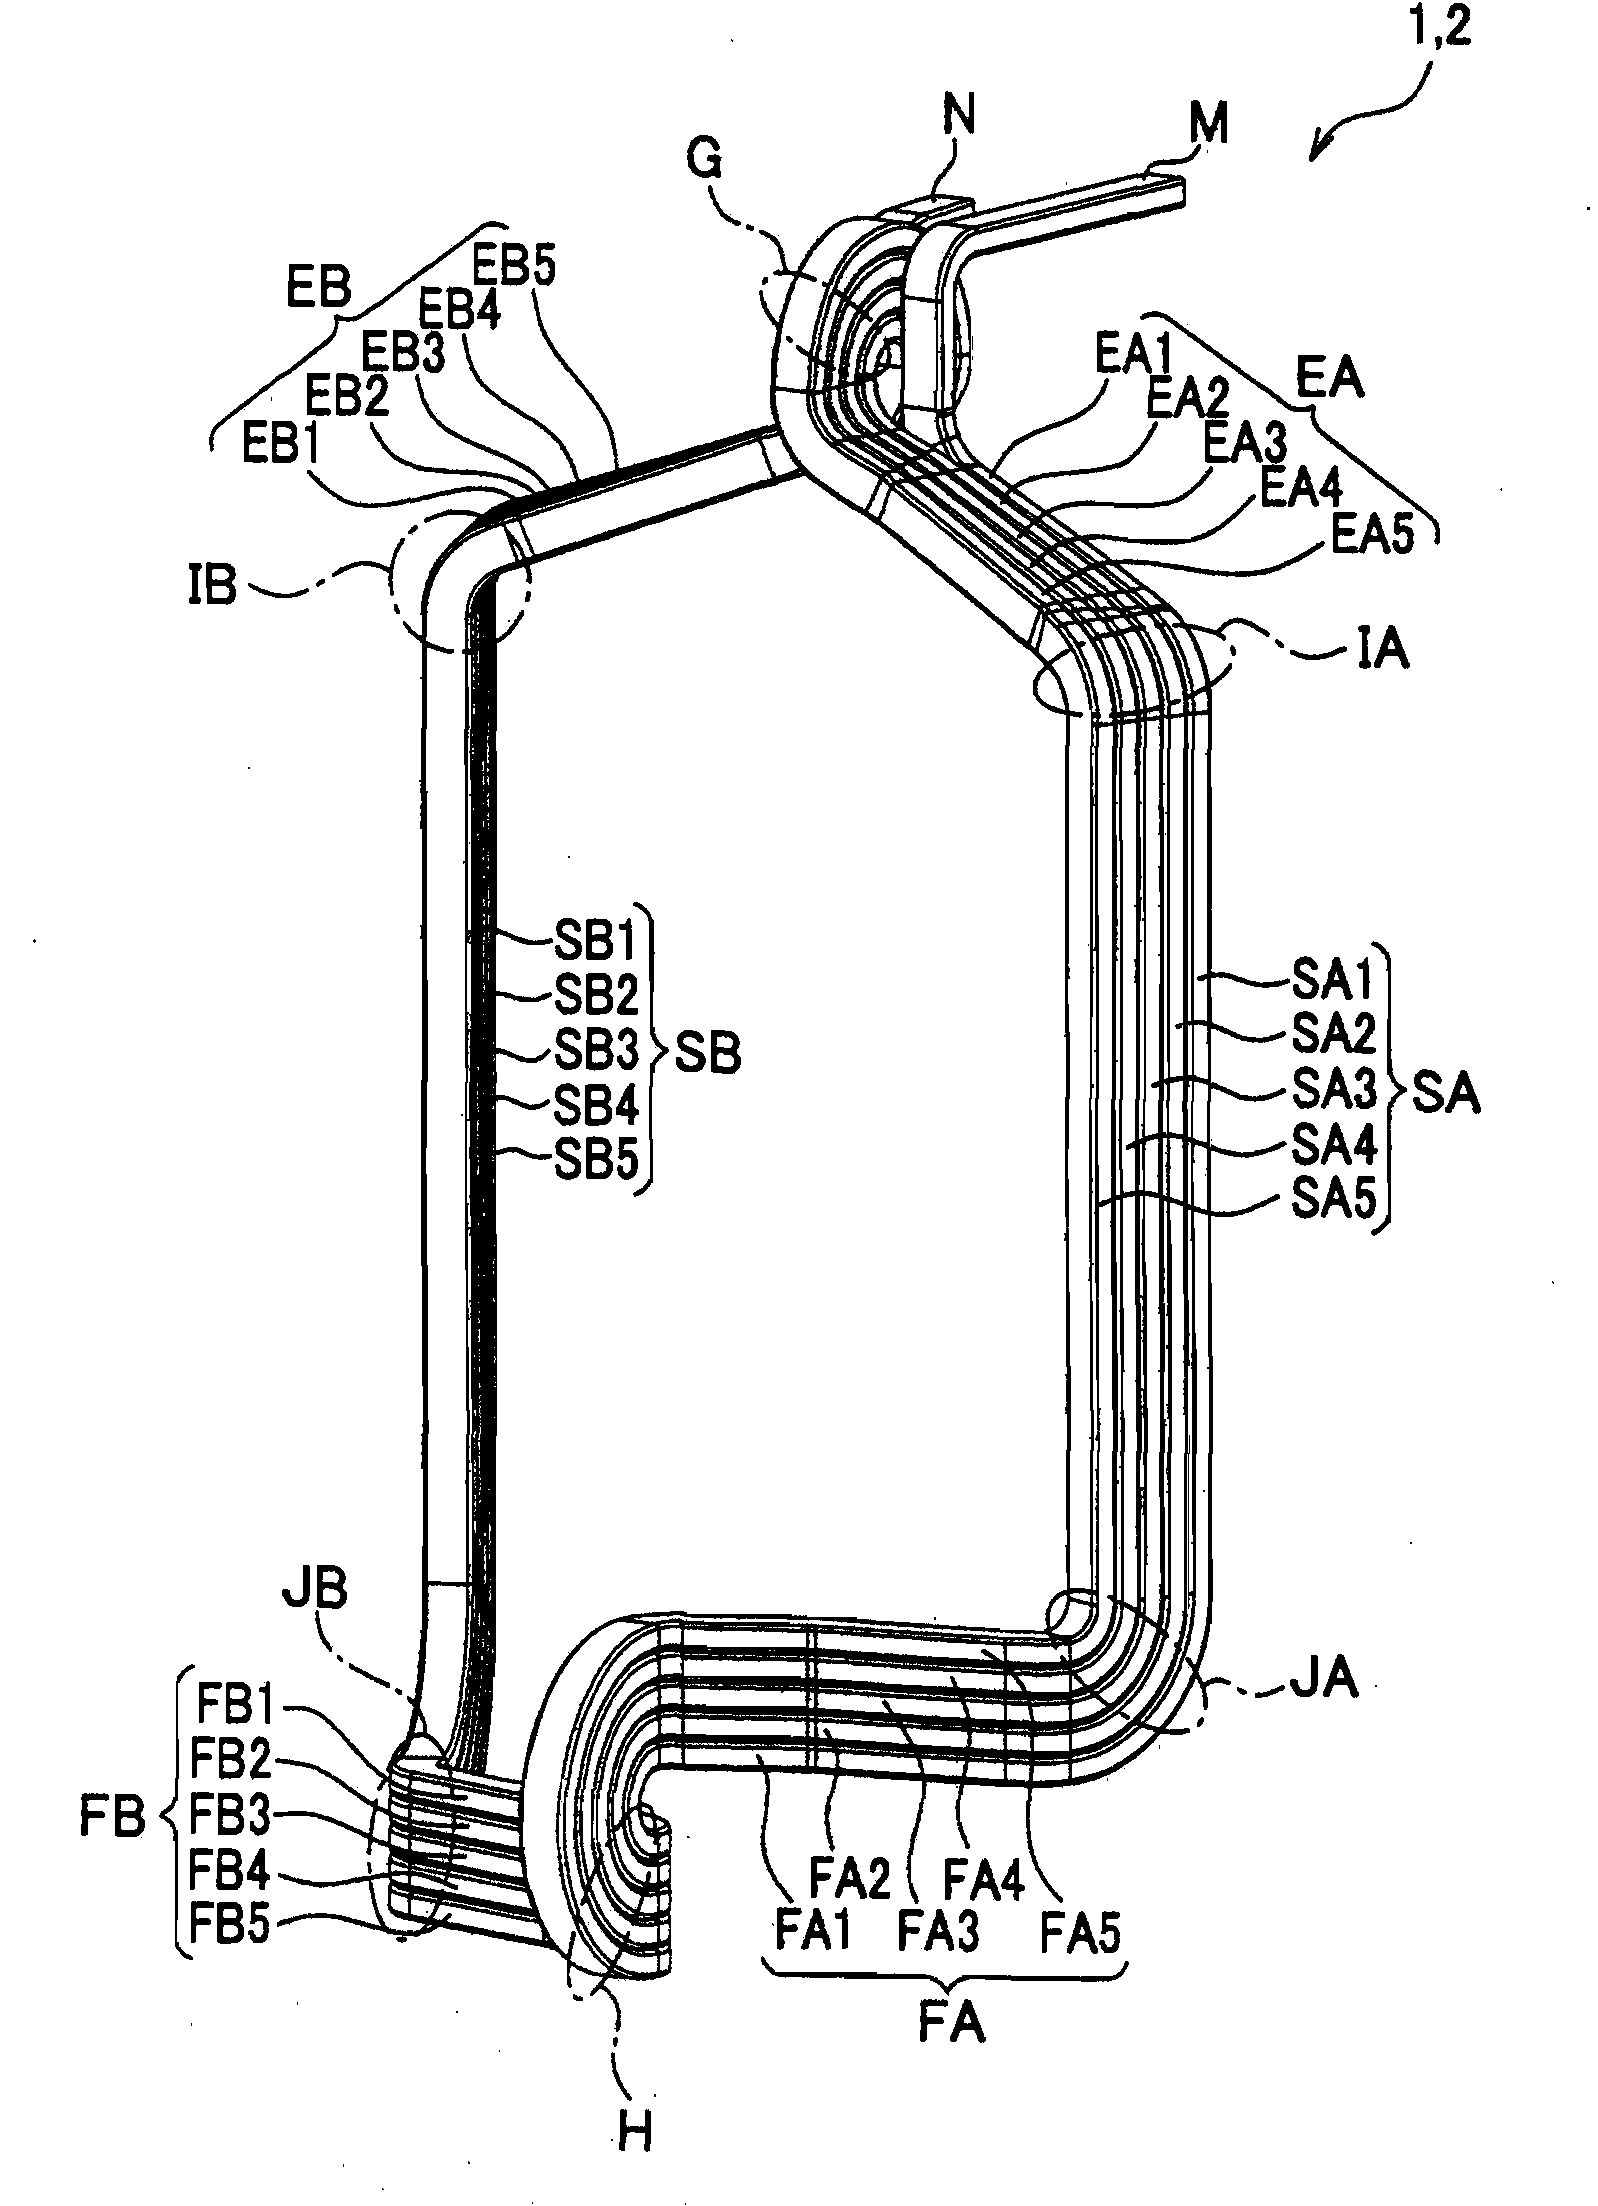 Stator of rotating electrical machine, method of manufacturing same, and apparatus for manufacturing same